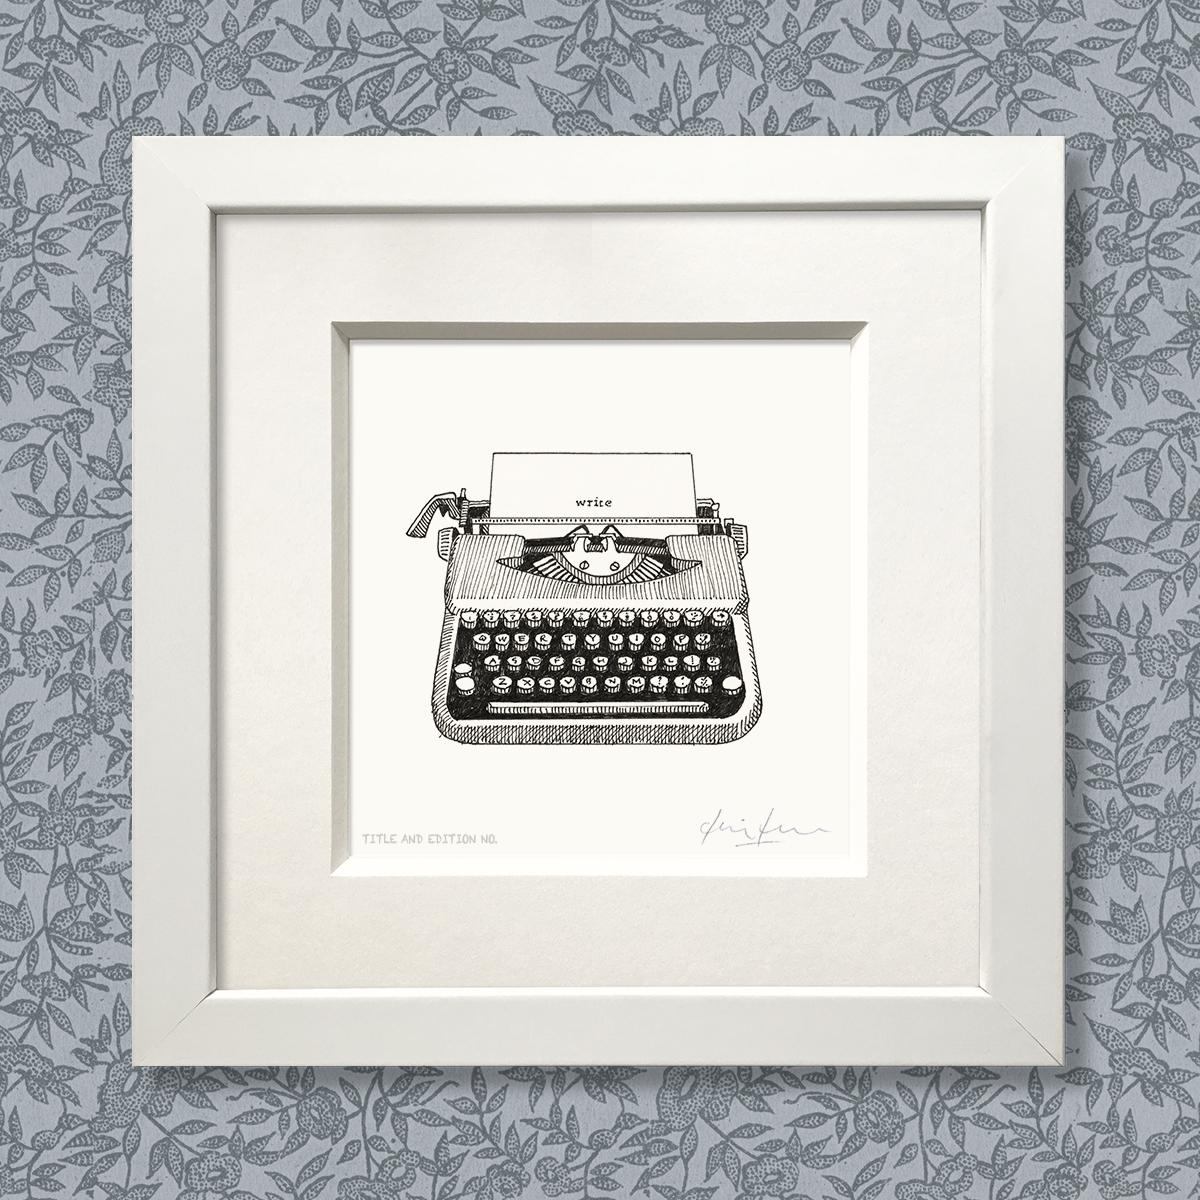 Limited edition print from pen and ink drawing of an old typewriter with the word 'write' in a white frame